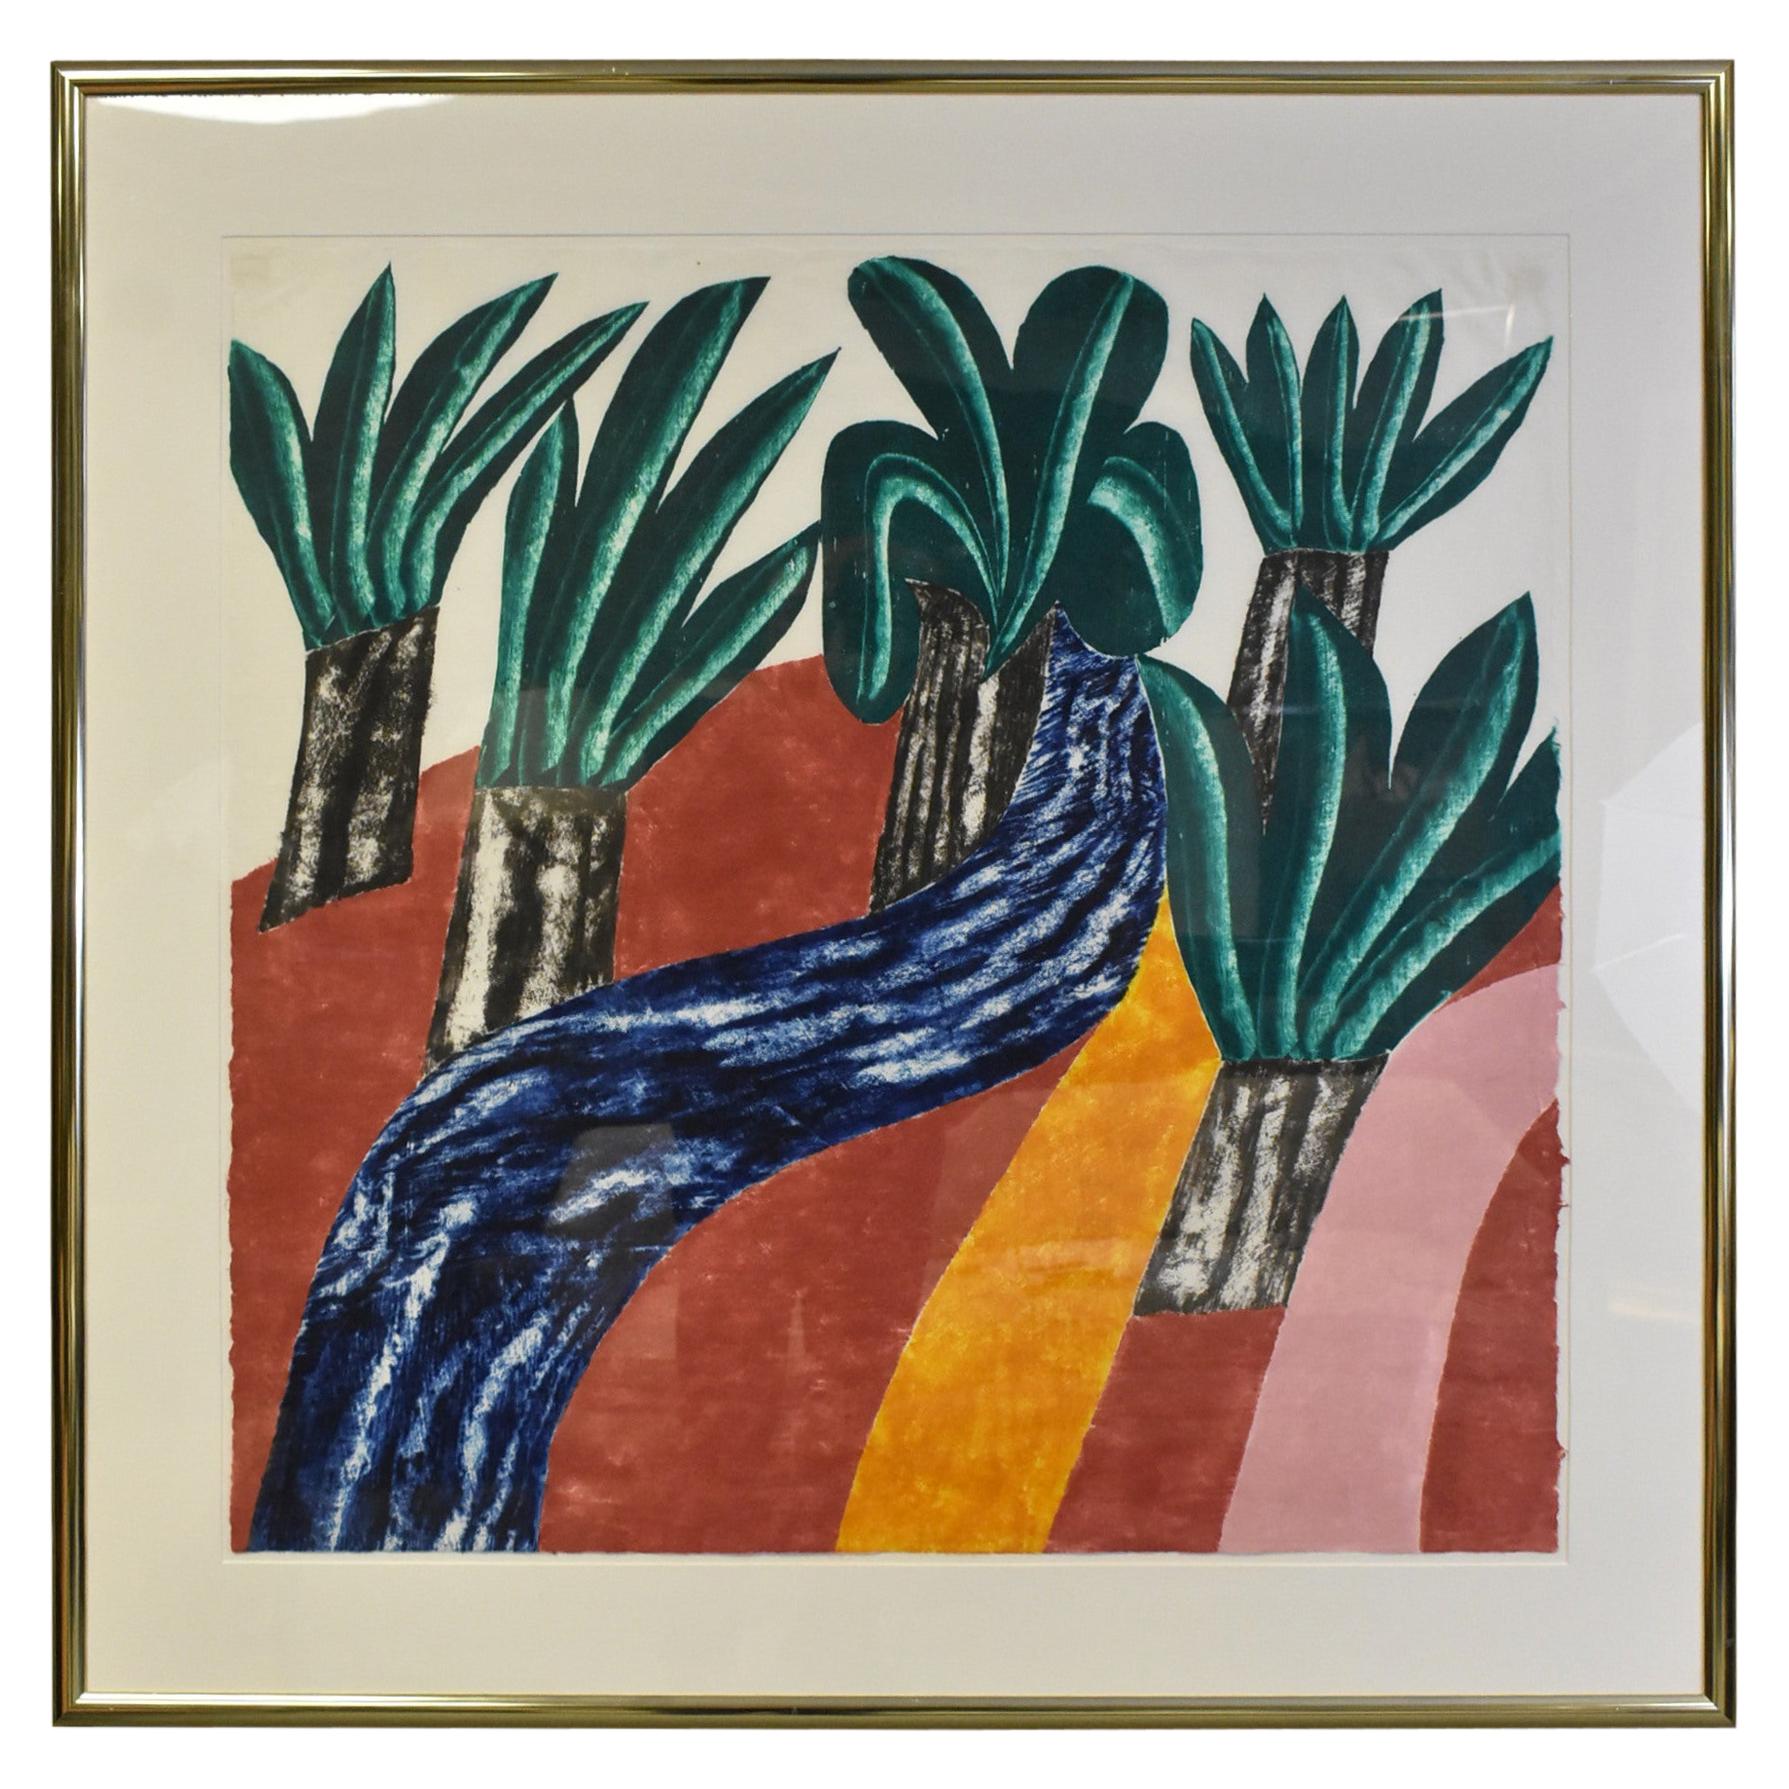 Limited Edition Modern Colorful Woodcut Print Carol Summers "Wild Palms"